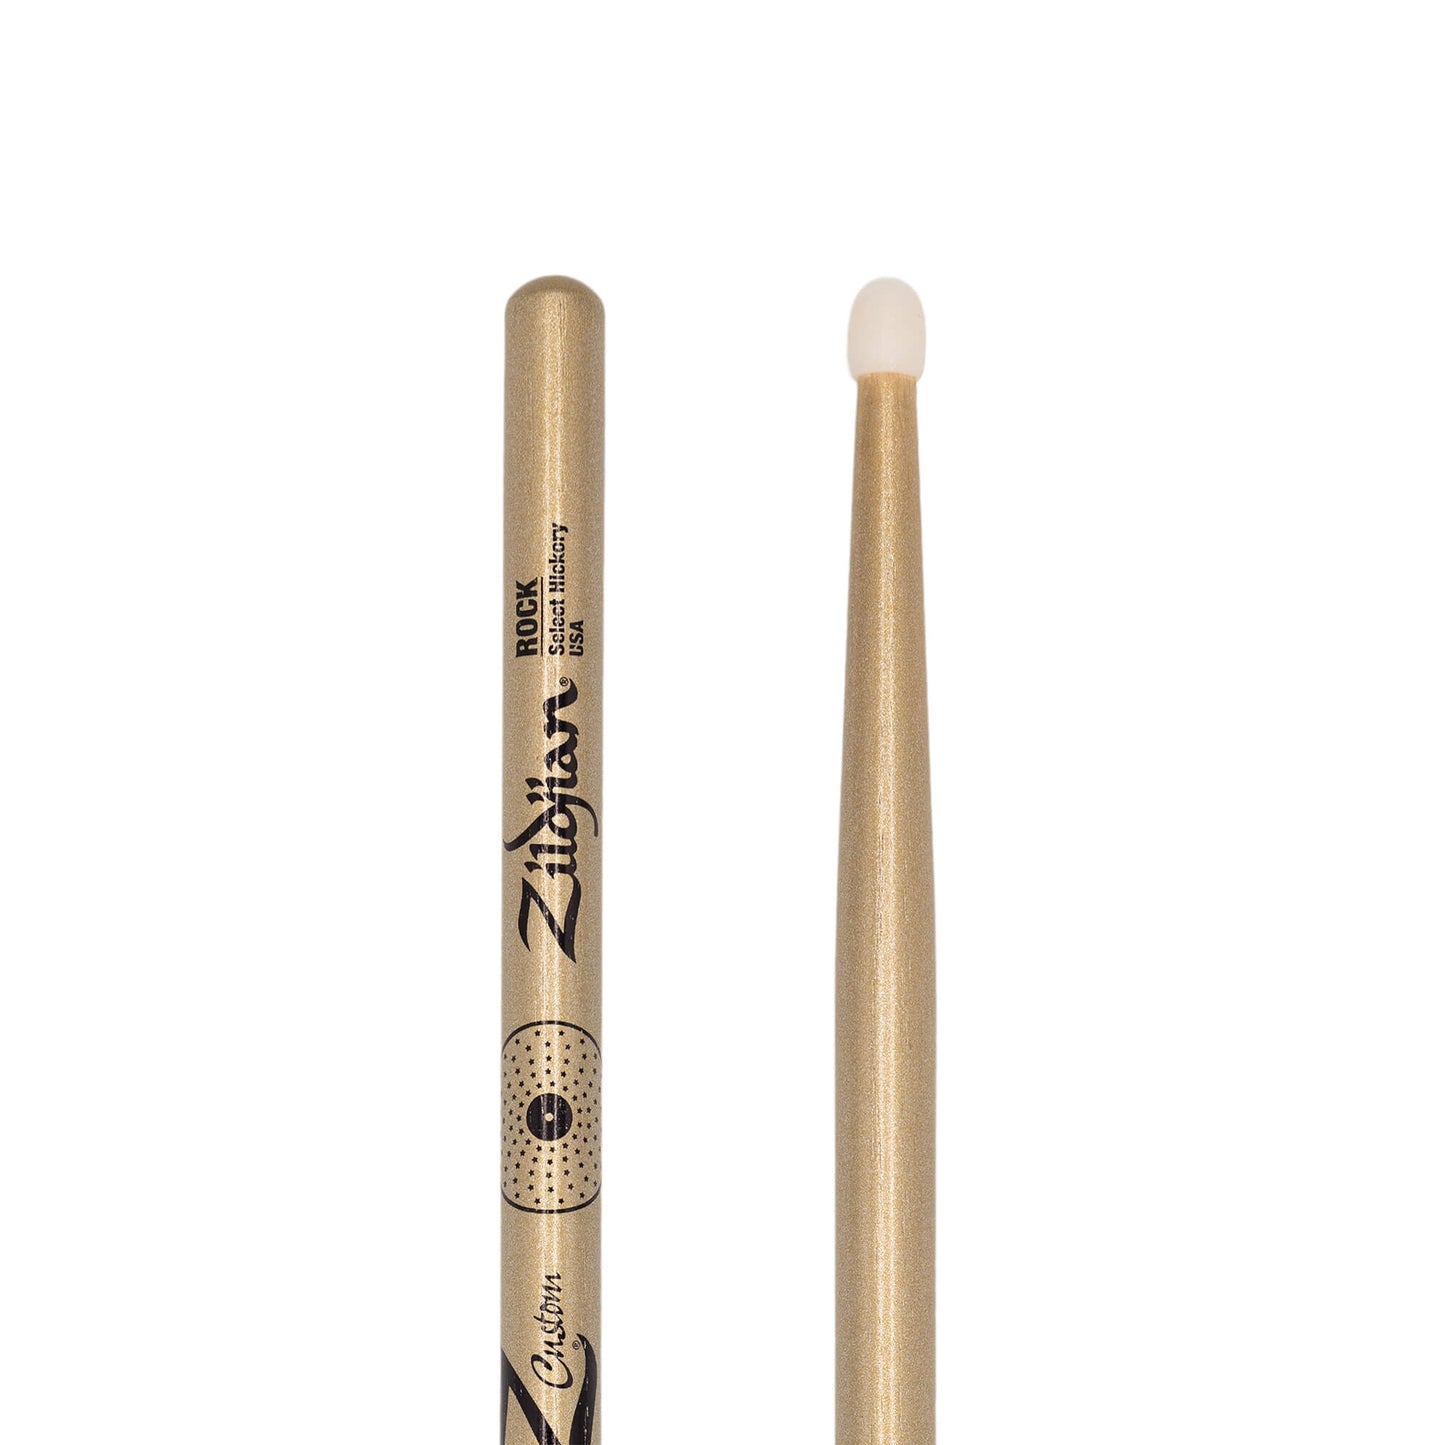 Z Custom LE Drumstick Collection ROCK Gold Chroma, Nylon Tip